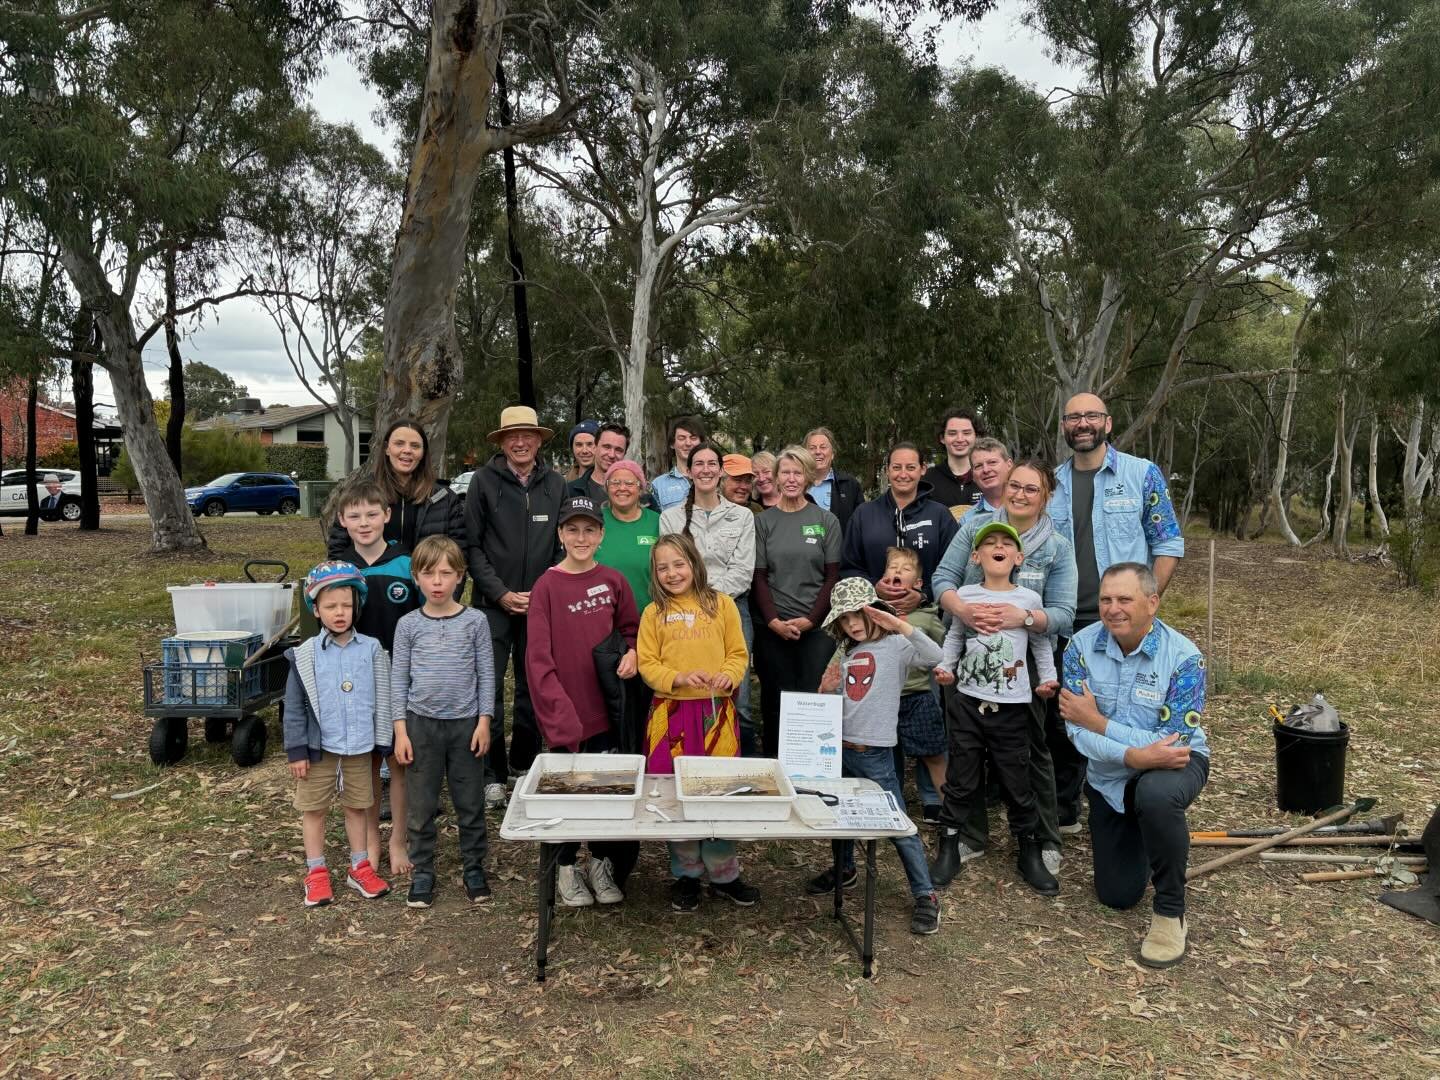 Thank you Ginninderra Catchment Group and Higgins Landcare Group for organising an Open Day today to highlight their landcare initiatives at Brazel St/Hudson St Park, Higgins and to provide an opportunity for community stalls and children&rsquo;s act